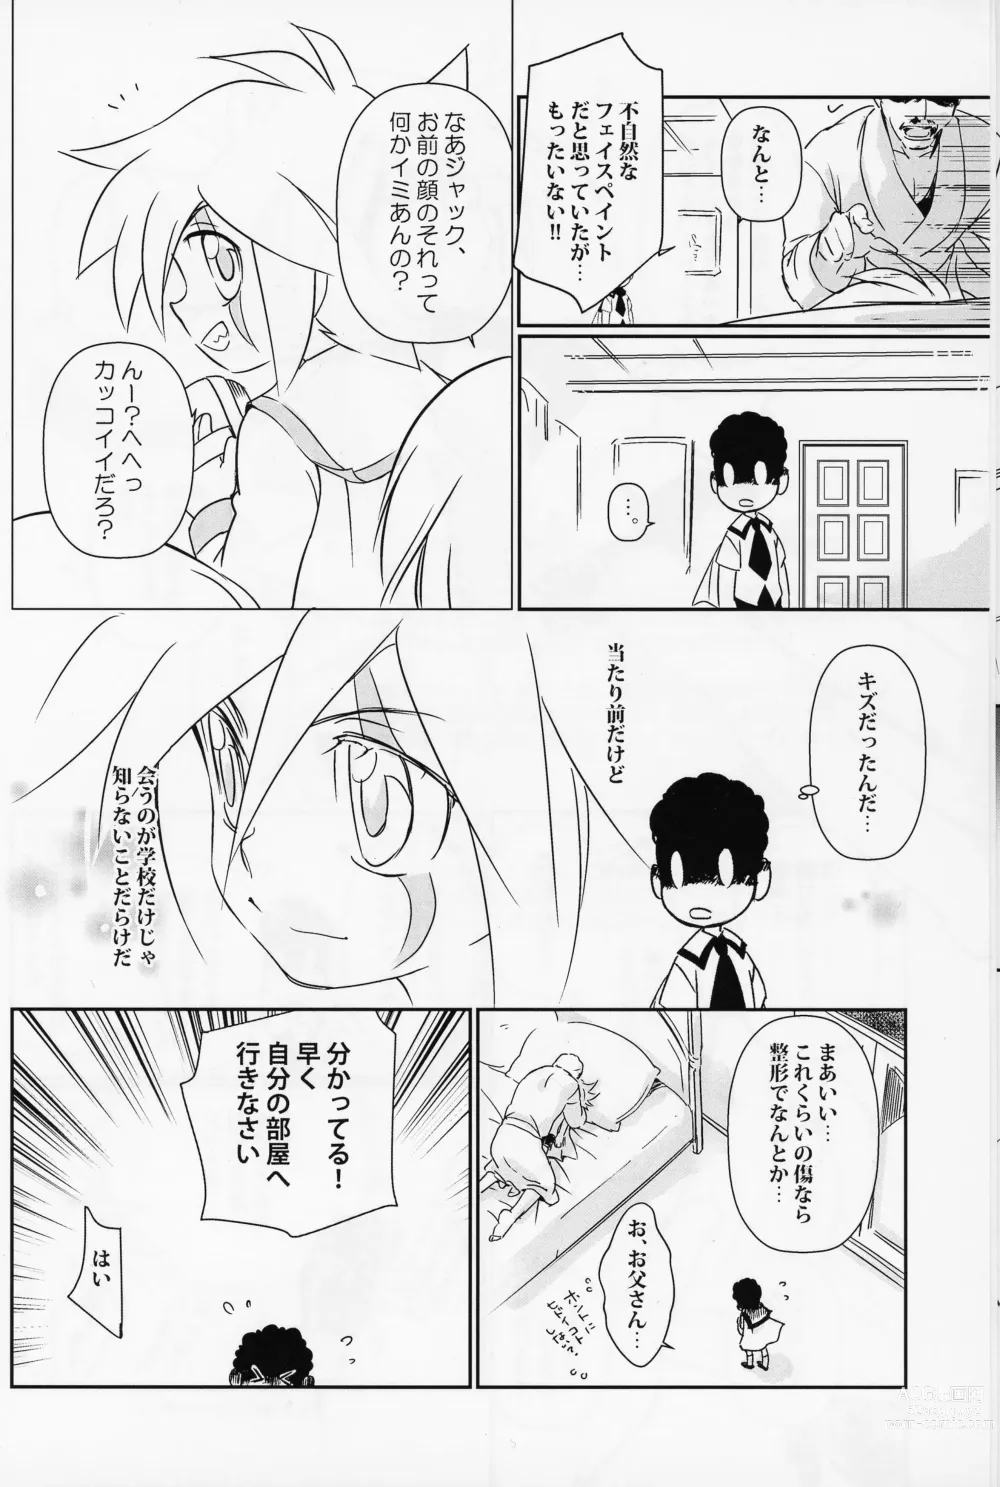 Page 7 of doujinshi Jack is at school.